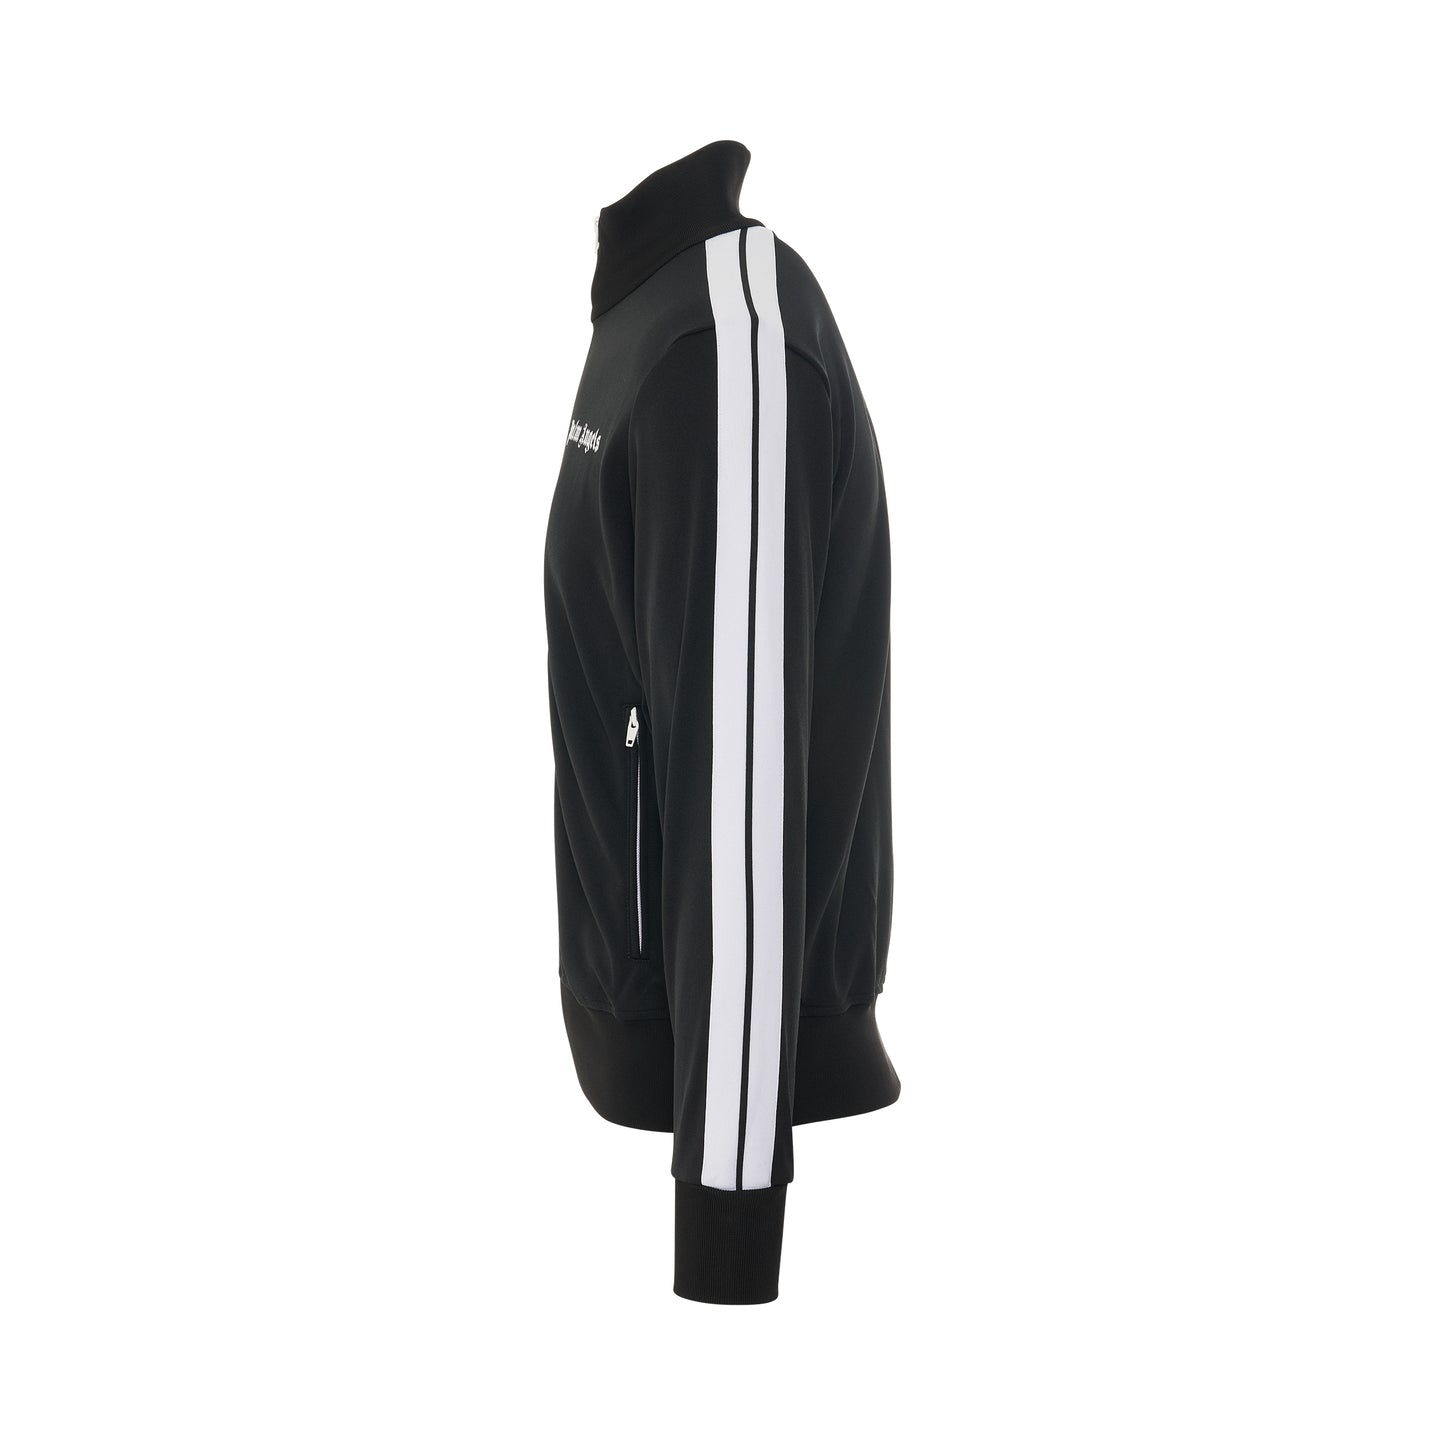 PA Classic Track Jacket in Black/White